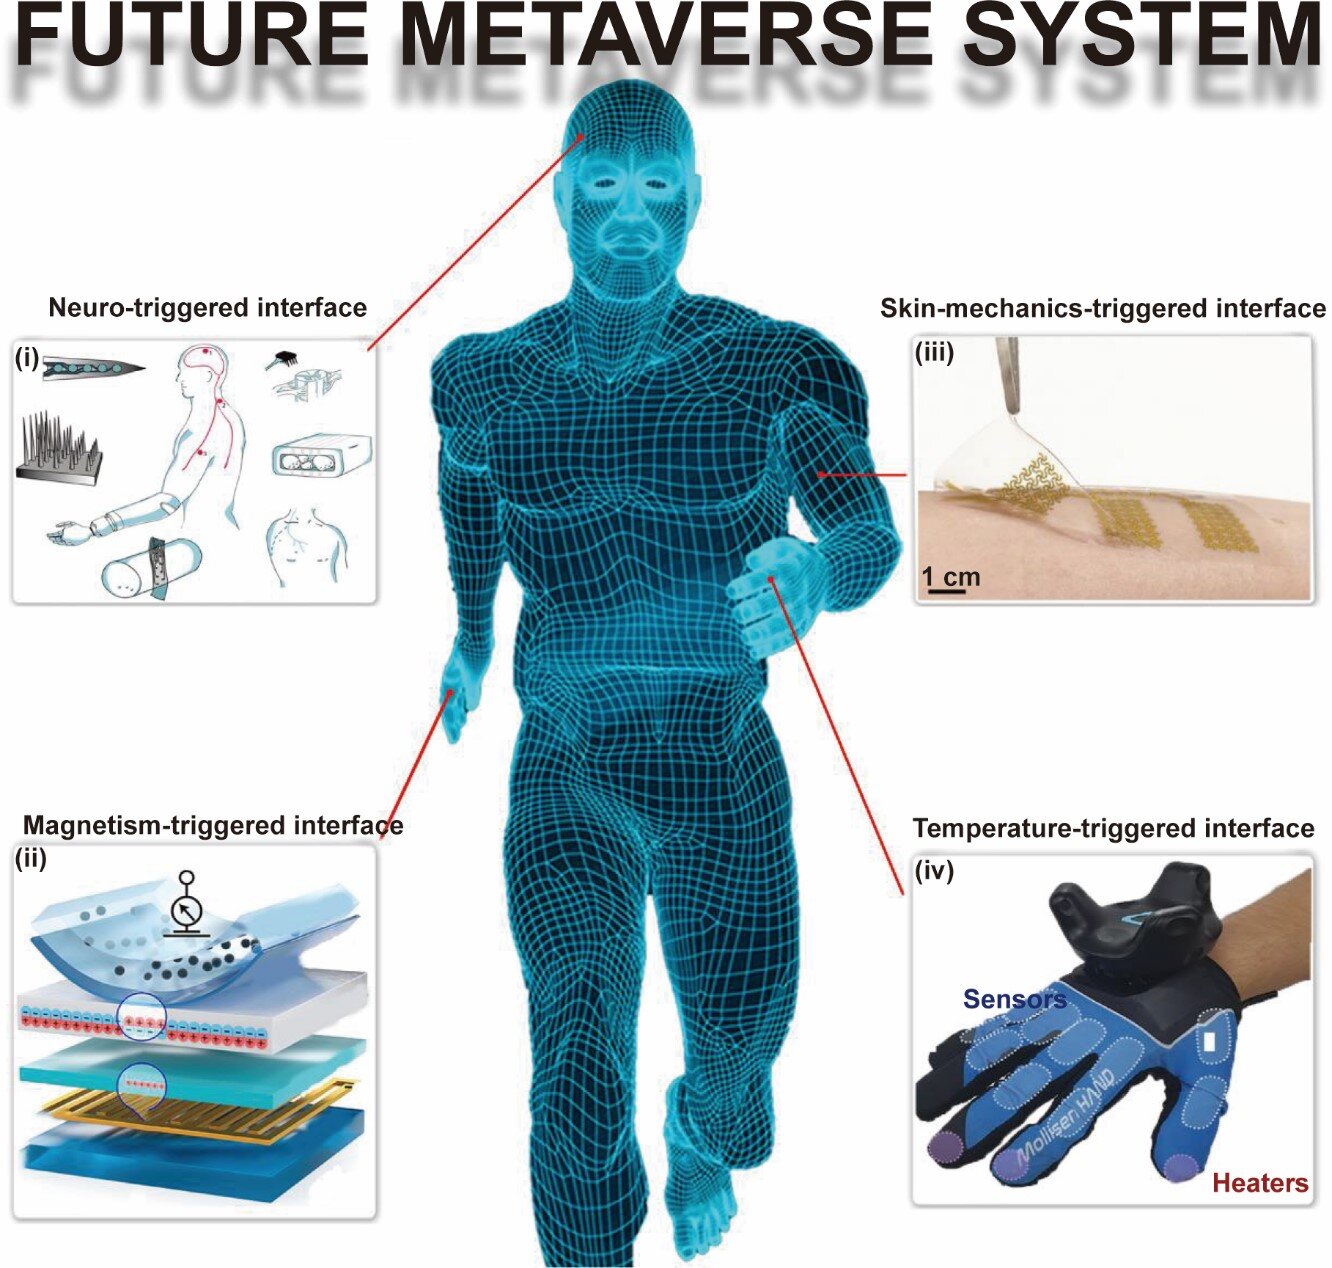 Flexible sensors made of nanomaterials—and the metaverse—will redefine how people live in the future